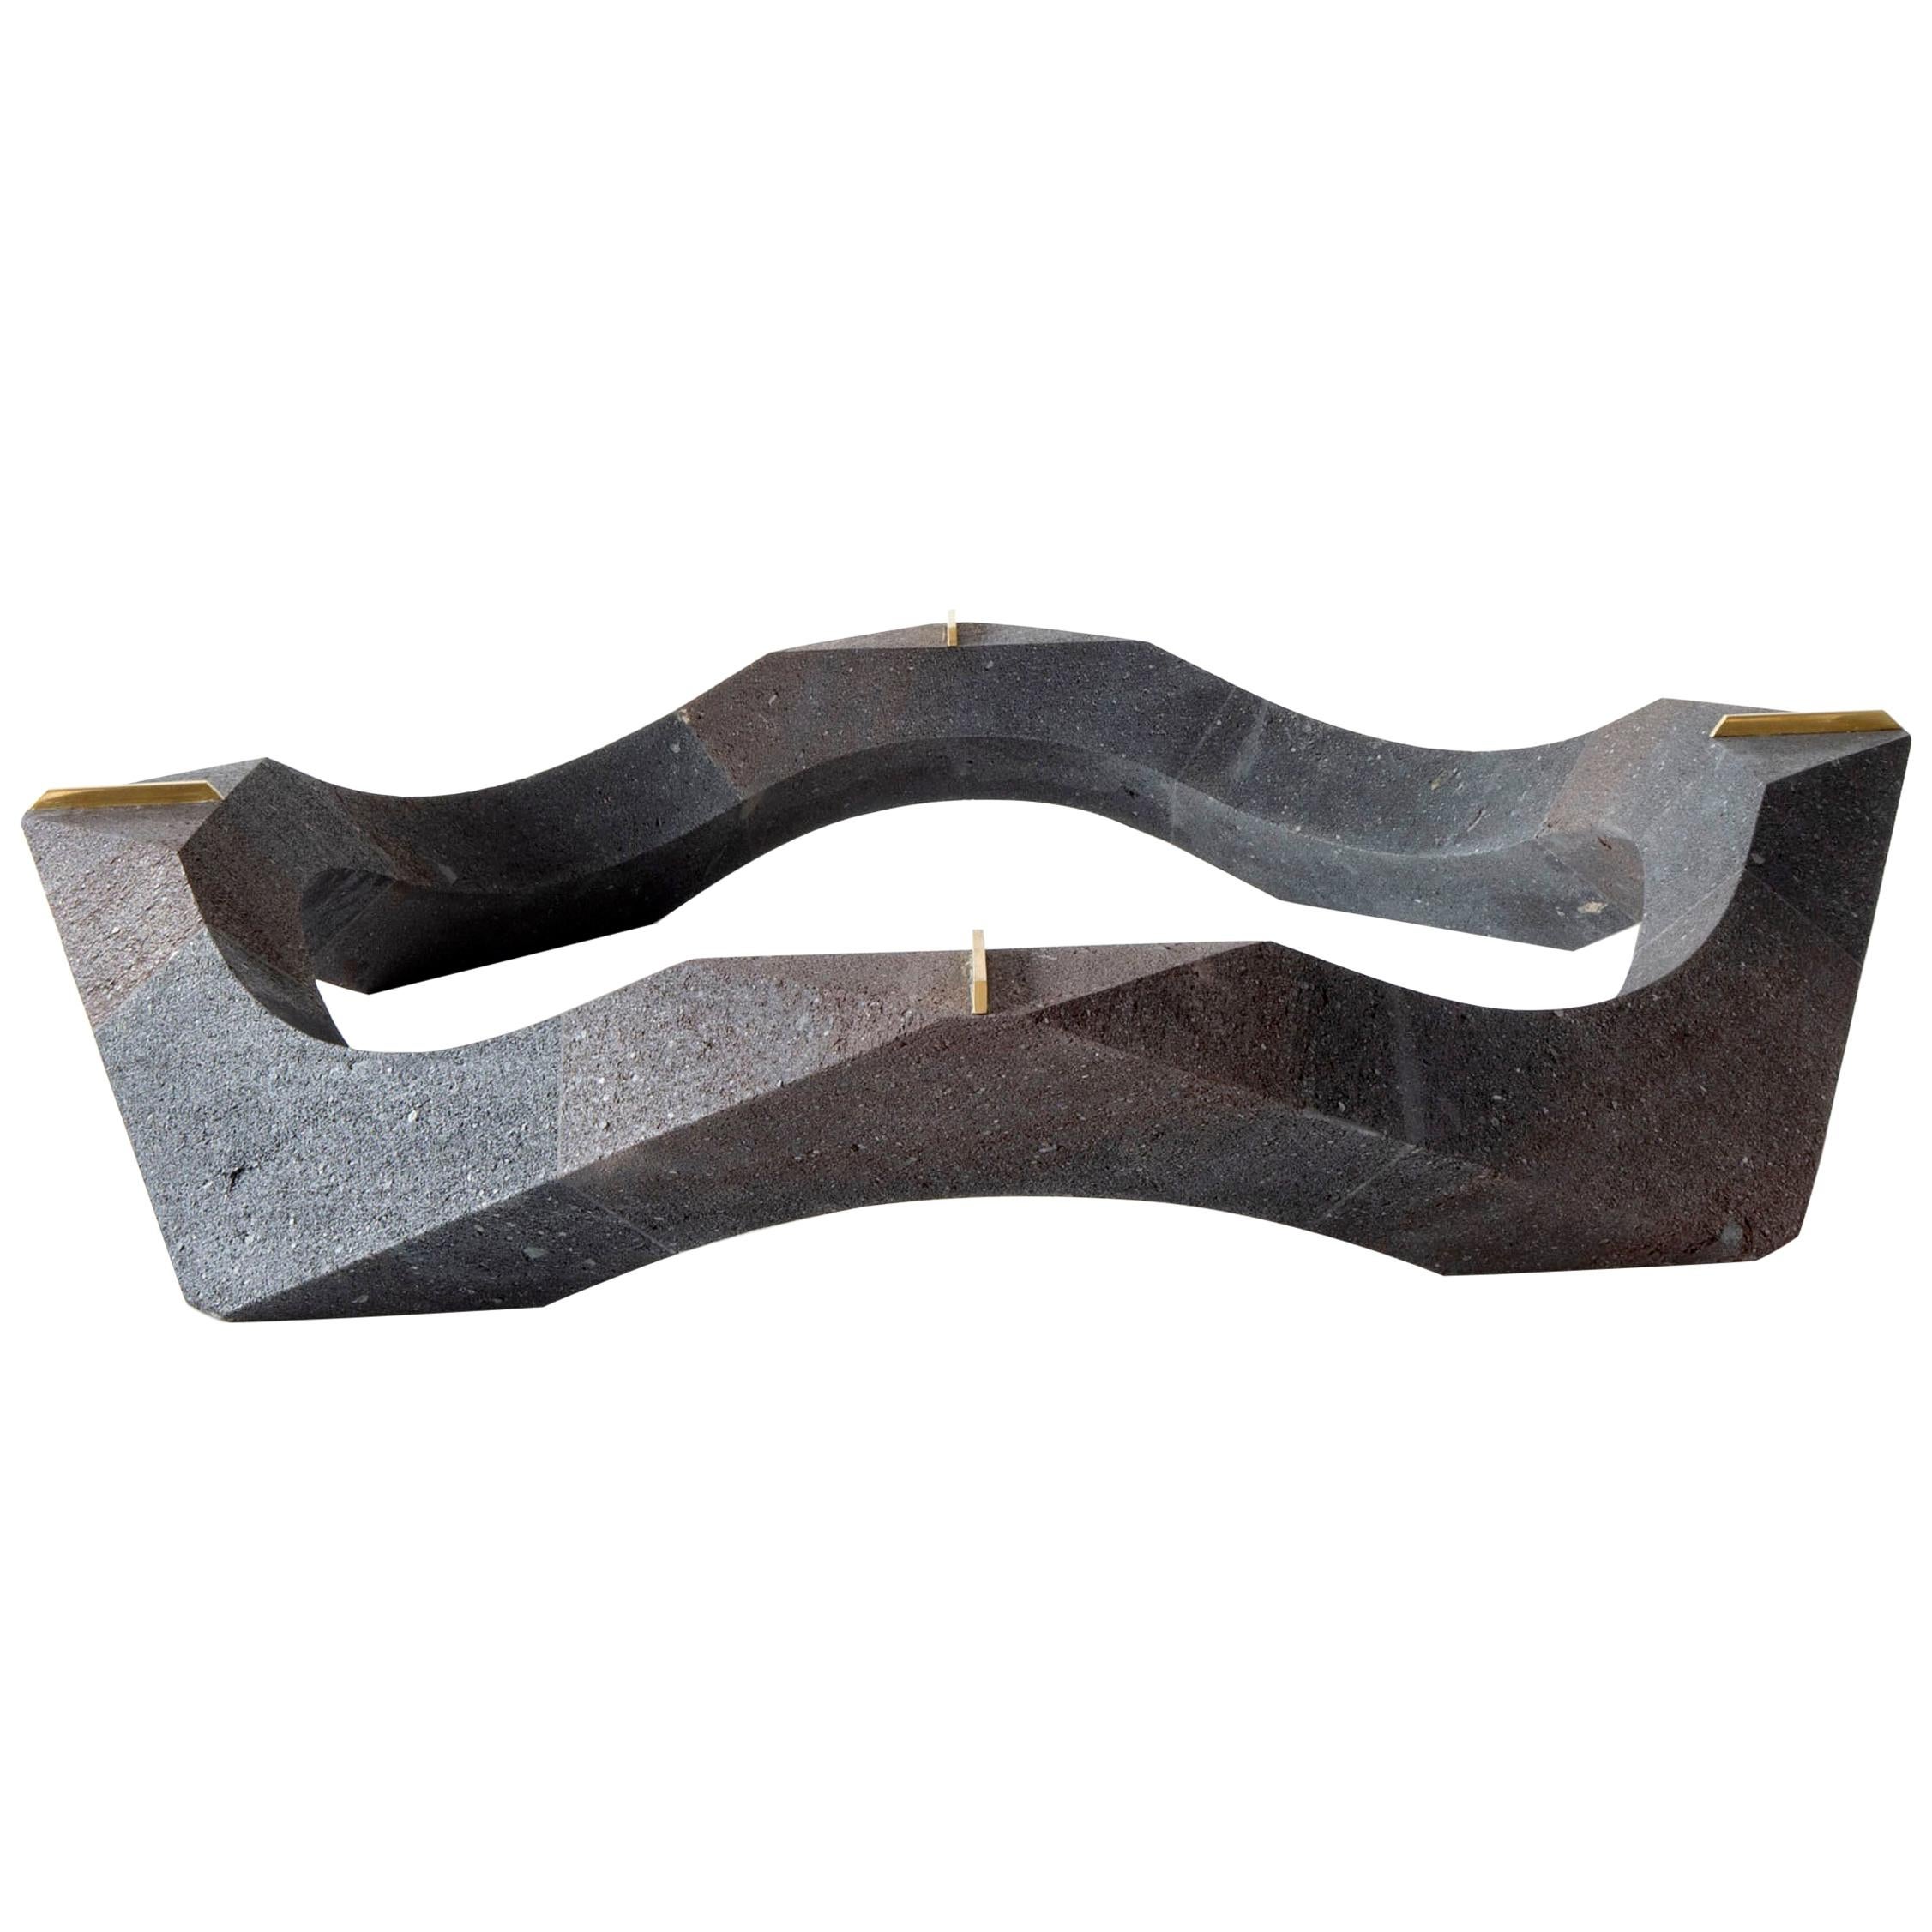 "Naui" Contemporary Mexican Polished Lava Stone, Geometric Table For Sale